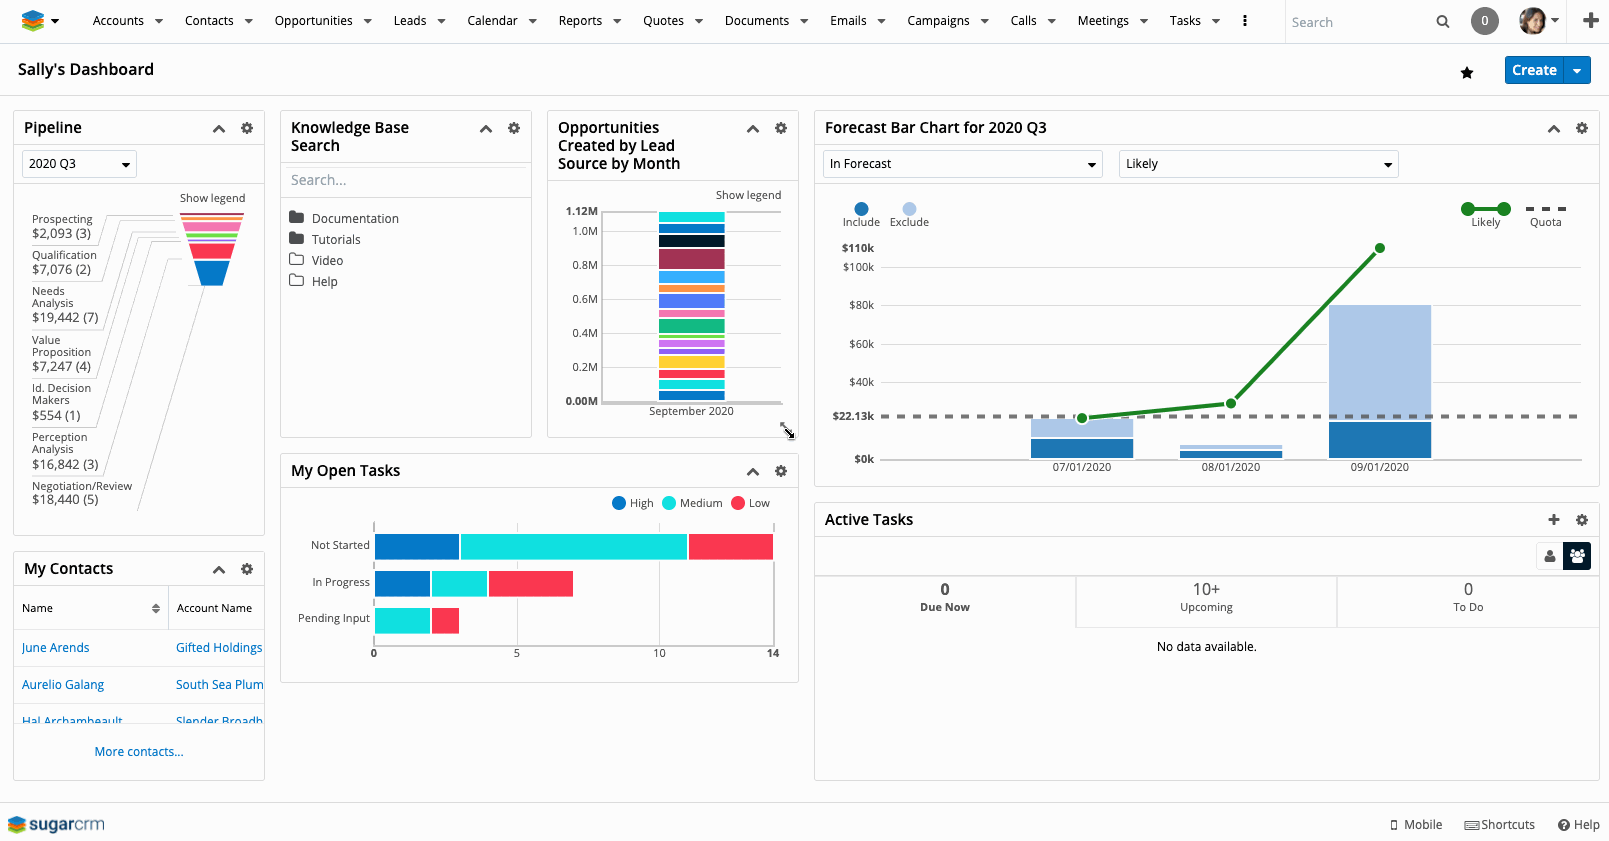 New and Improved flexible dashboards - Coming in Q4 2020